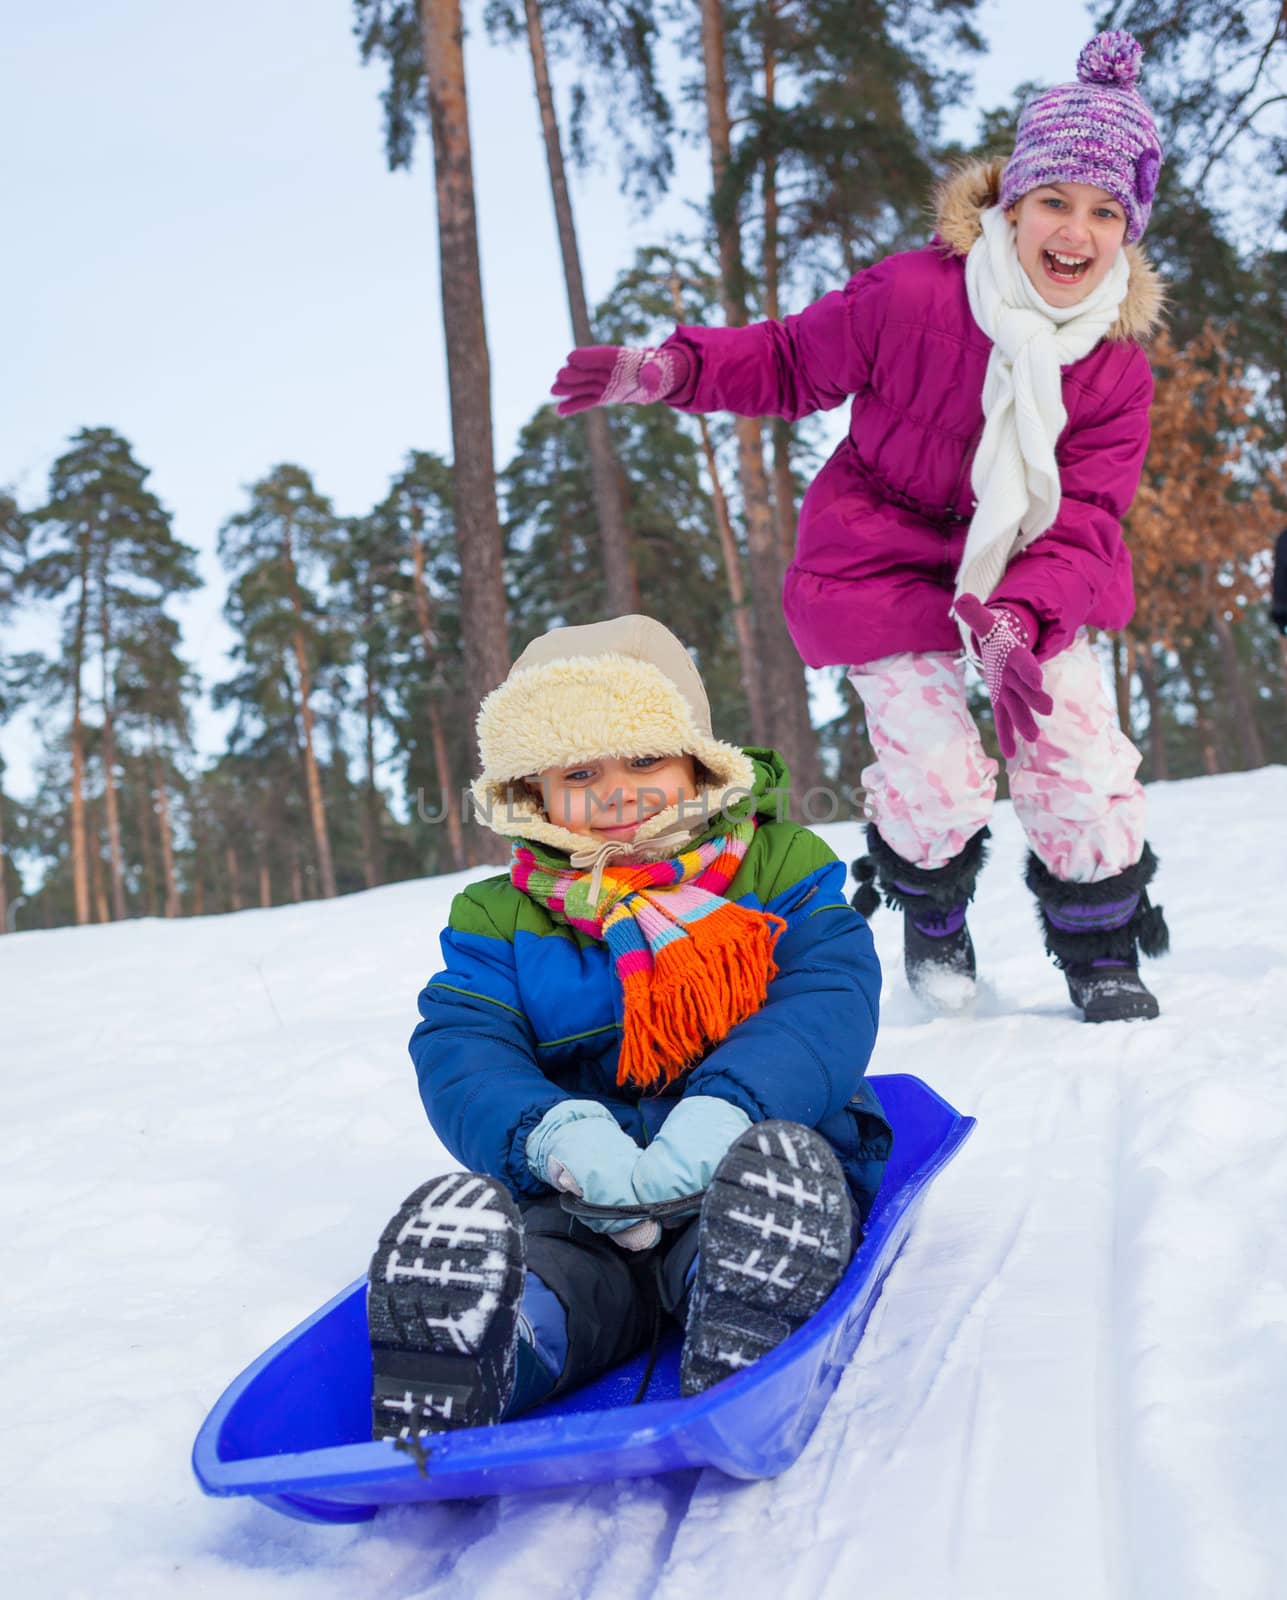 Cute sister and brother on sleds in snow forest. Focus on the boy